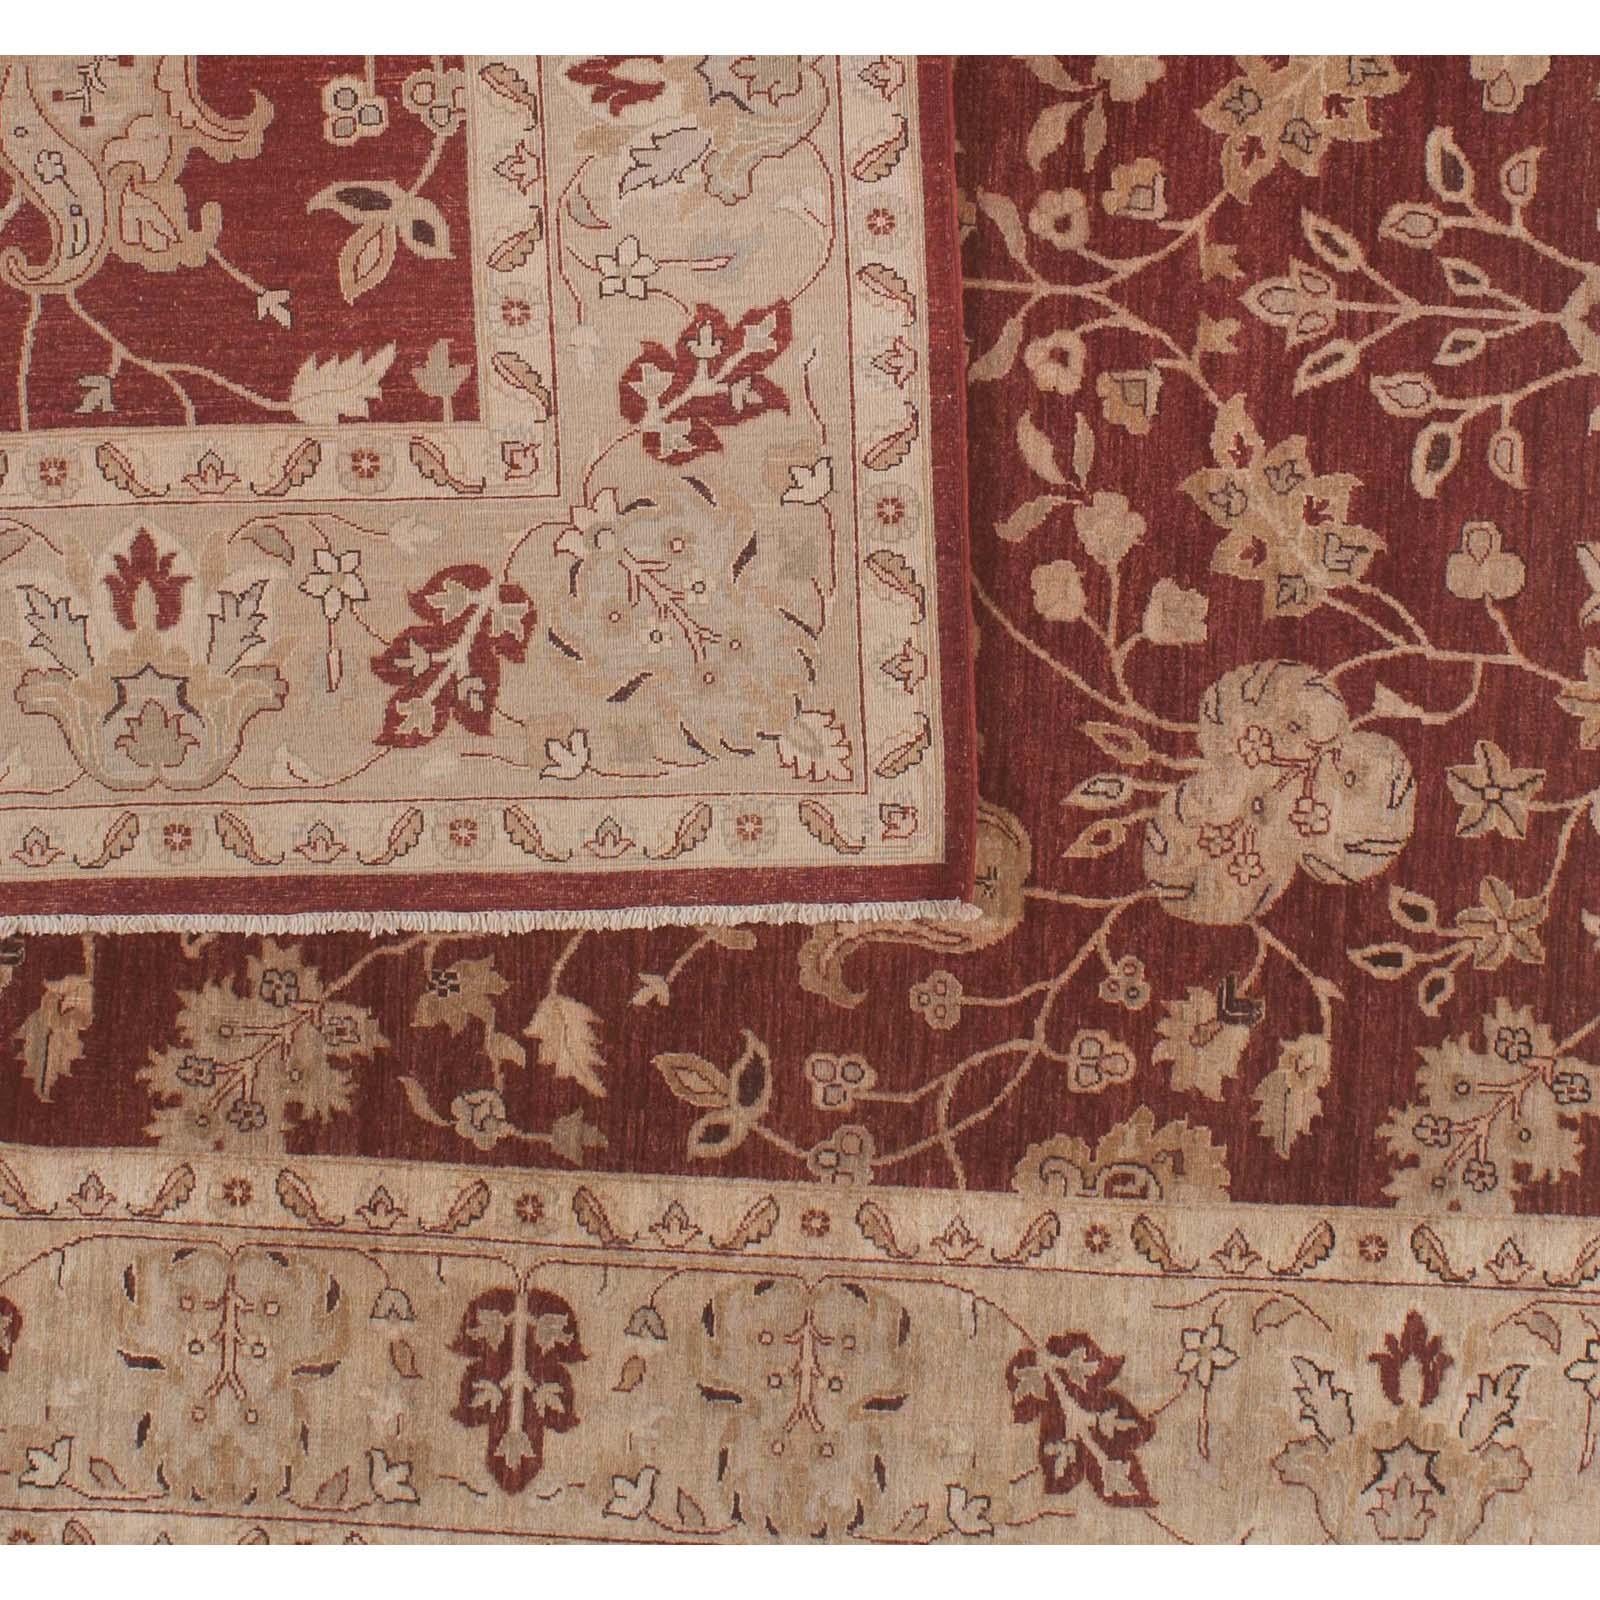 Leaves are the dominant theme in this traditional Pakistani floral motif area rug. Red leaves dance in a wide beige border while an intricate pattern of leaves and blossoms stands out against a bold red core. This hand knotted wool rug uses vegetal